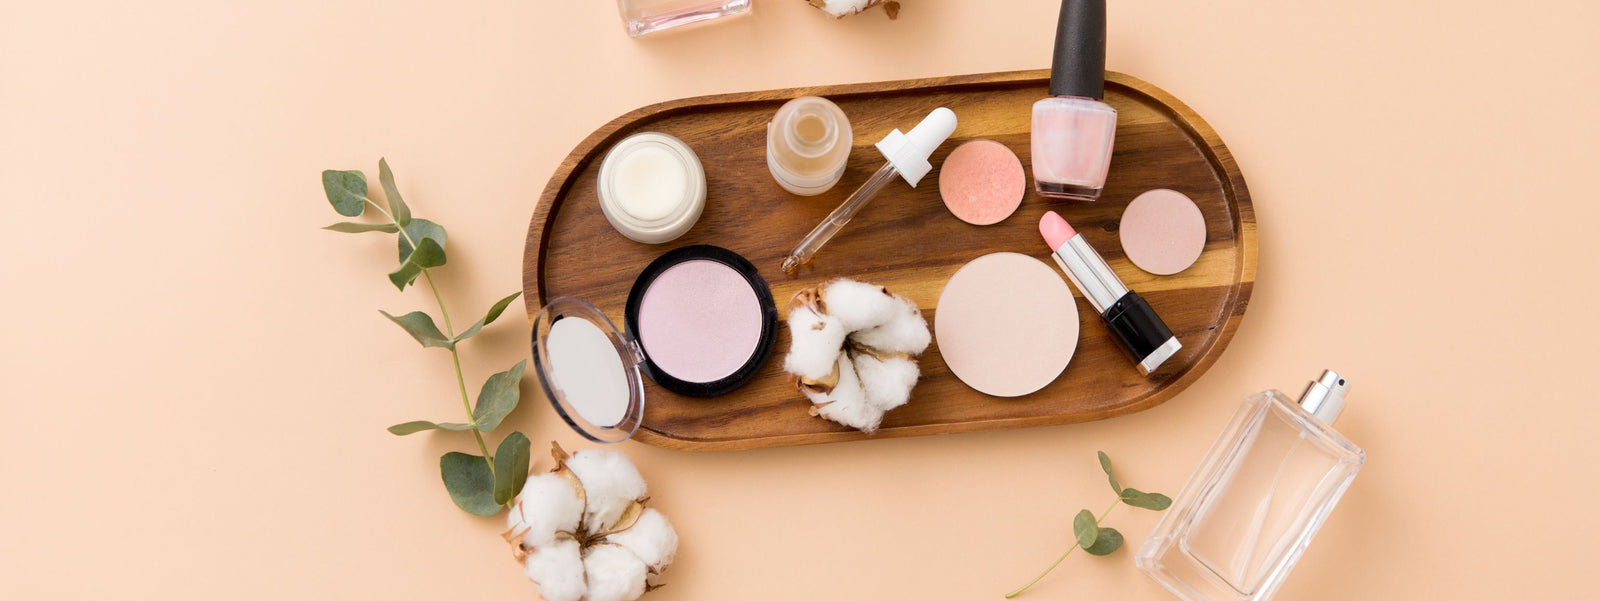 Avoid These 4 Toxic Ingredients and Go Natural with Your Makeup Routine